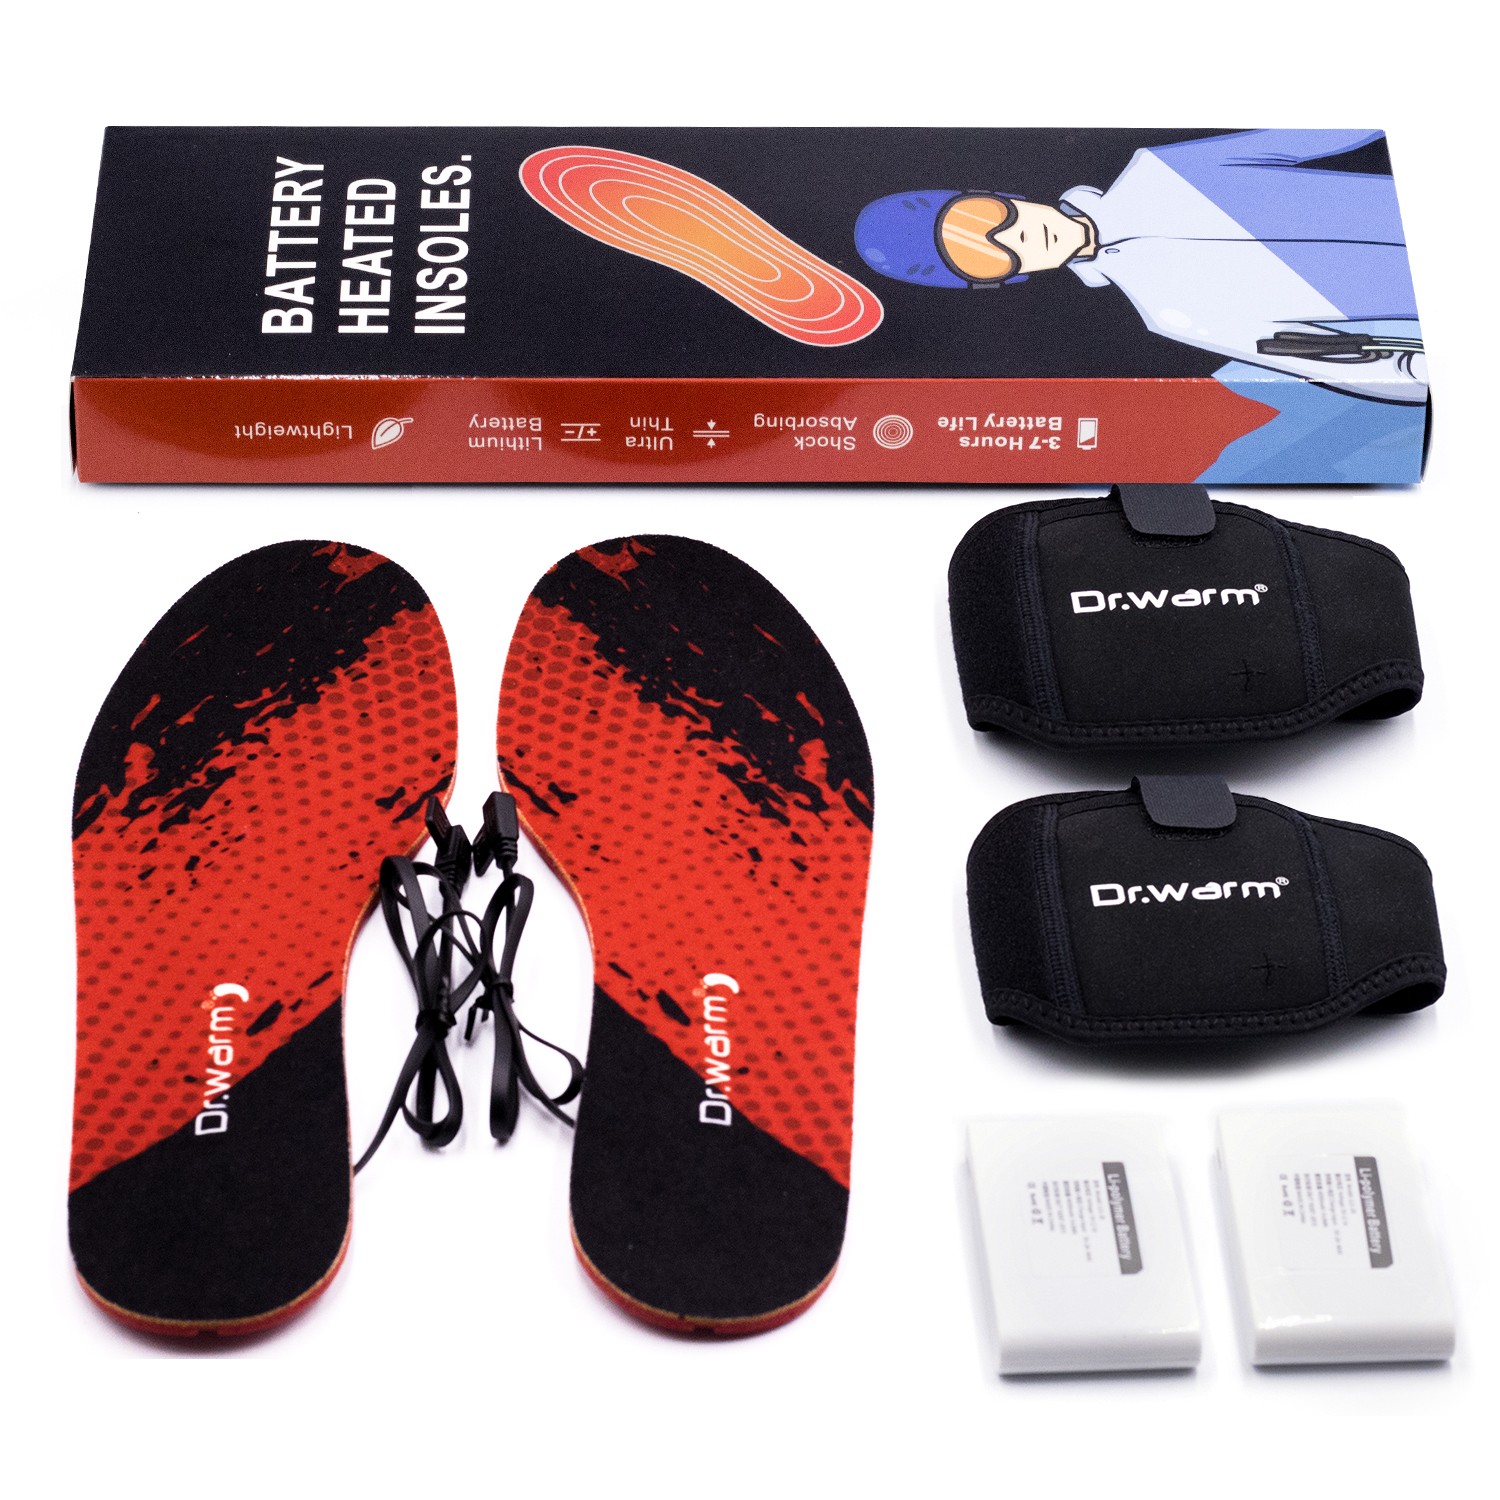 Dr. Warm warm insoles for shoes-23